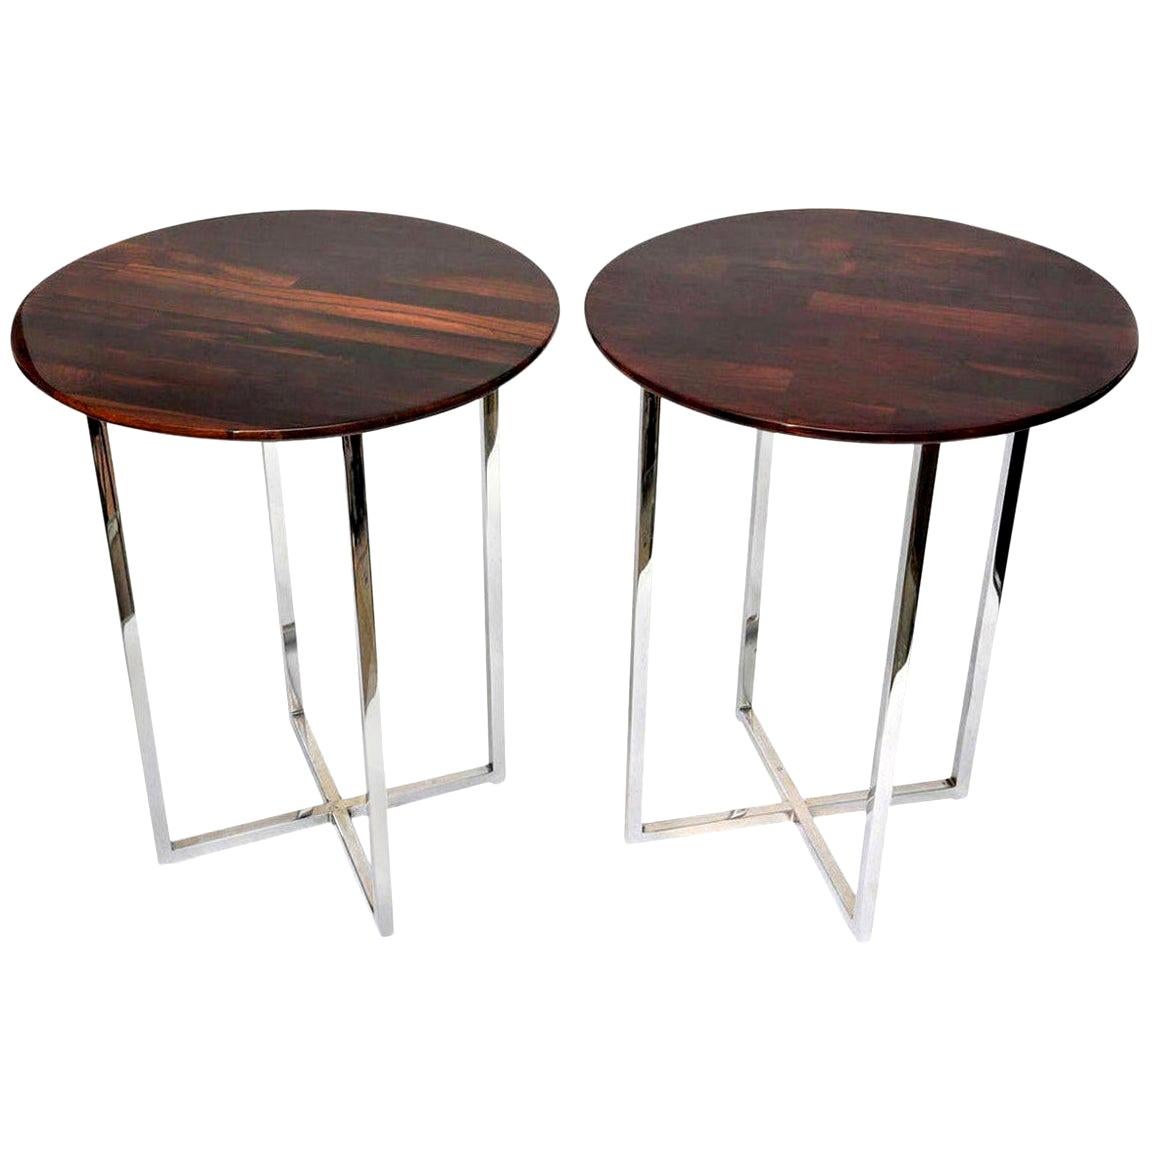 Pair of Milo Baughman Rosewood and Chrome Side Tables Vintage